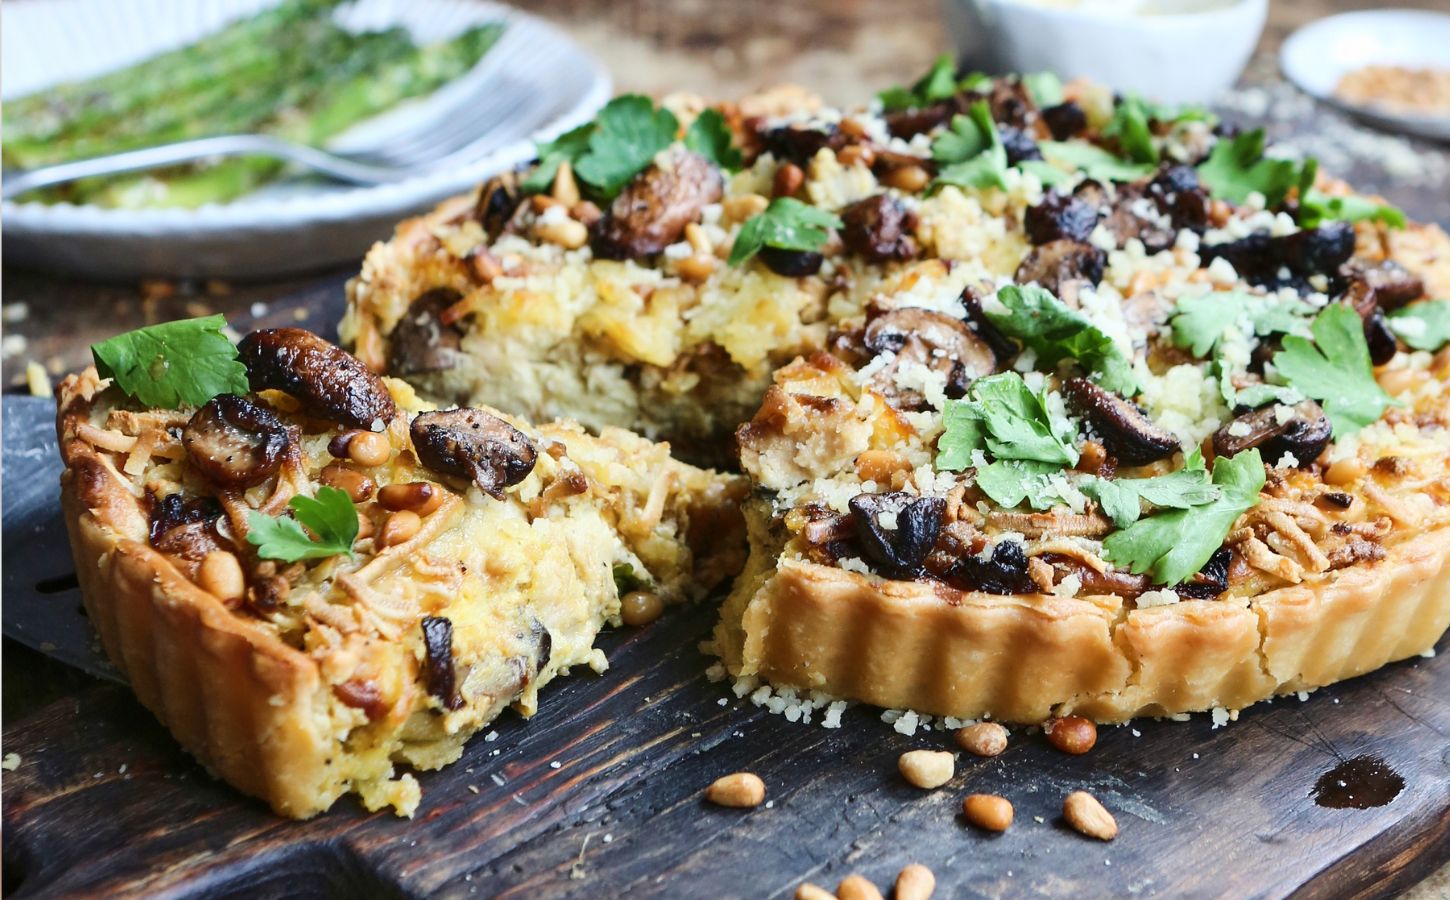 A vegan blue cheese quiche that uses dairy-free, eggless, and plant-based ingredients